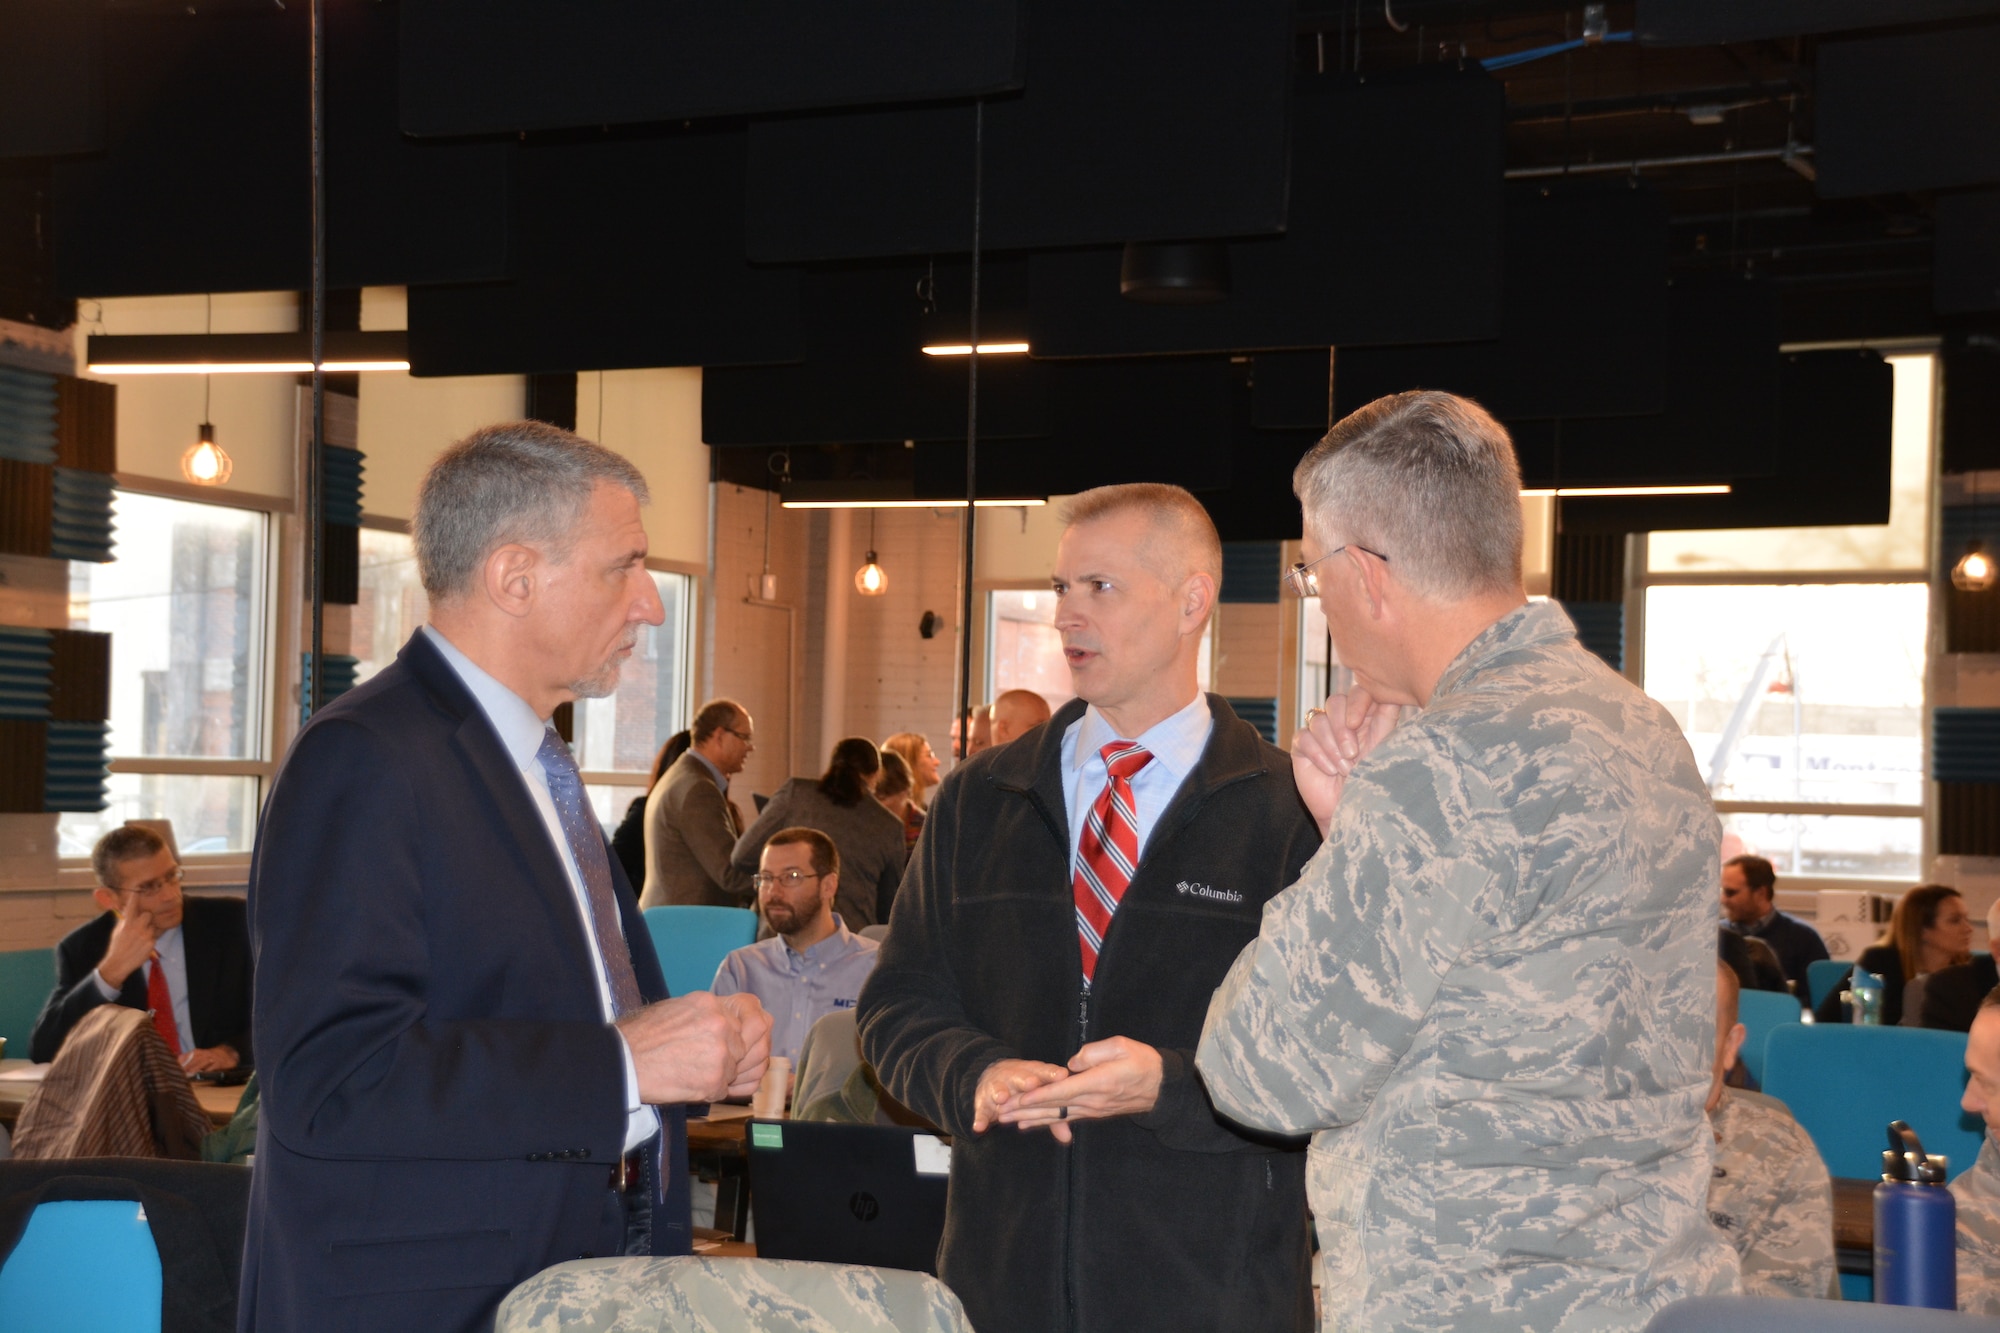 Dr. Kevin Geiss, Airman Systems Directorate director, talks with Dr. David Neri, Air Force Medical Service Chief Scientist, and Col. LaFrance during the inaugural Physiological Episodes Mitigation Technology Summit and Industry Day in Dayton, Ohio, Dec. 17-18.